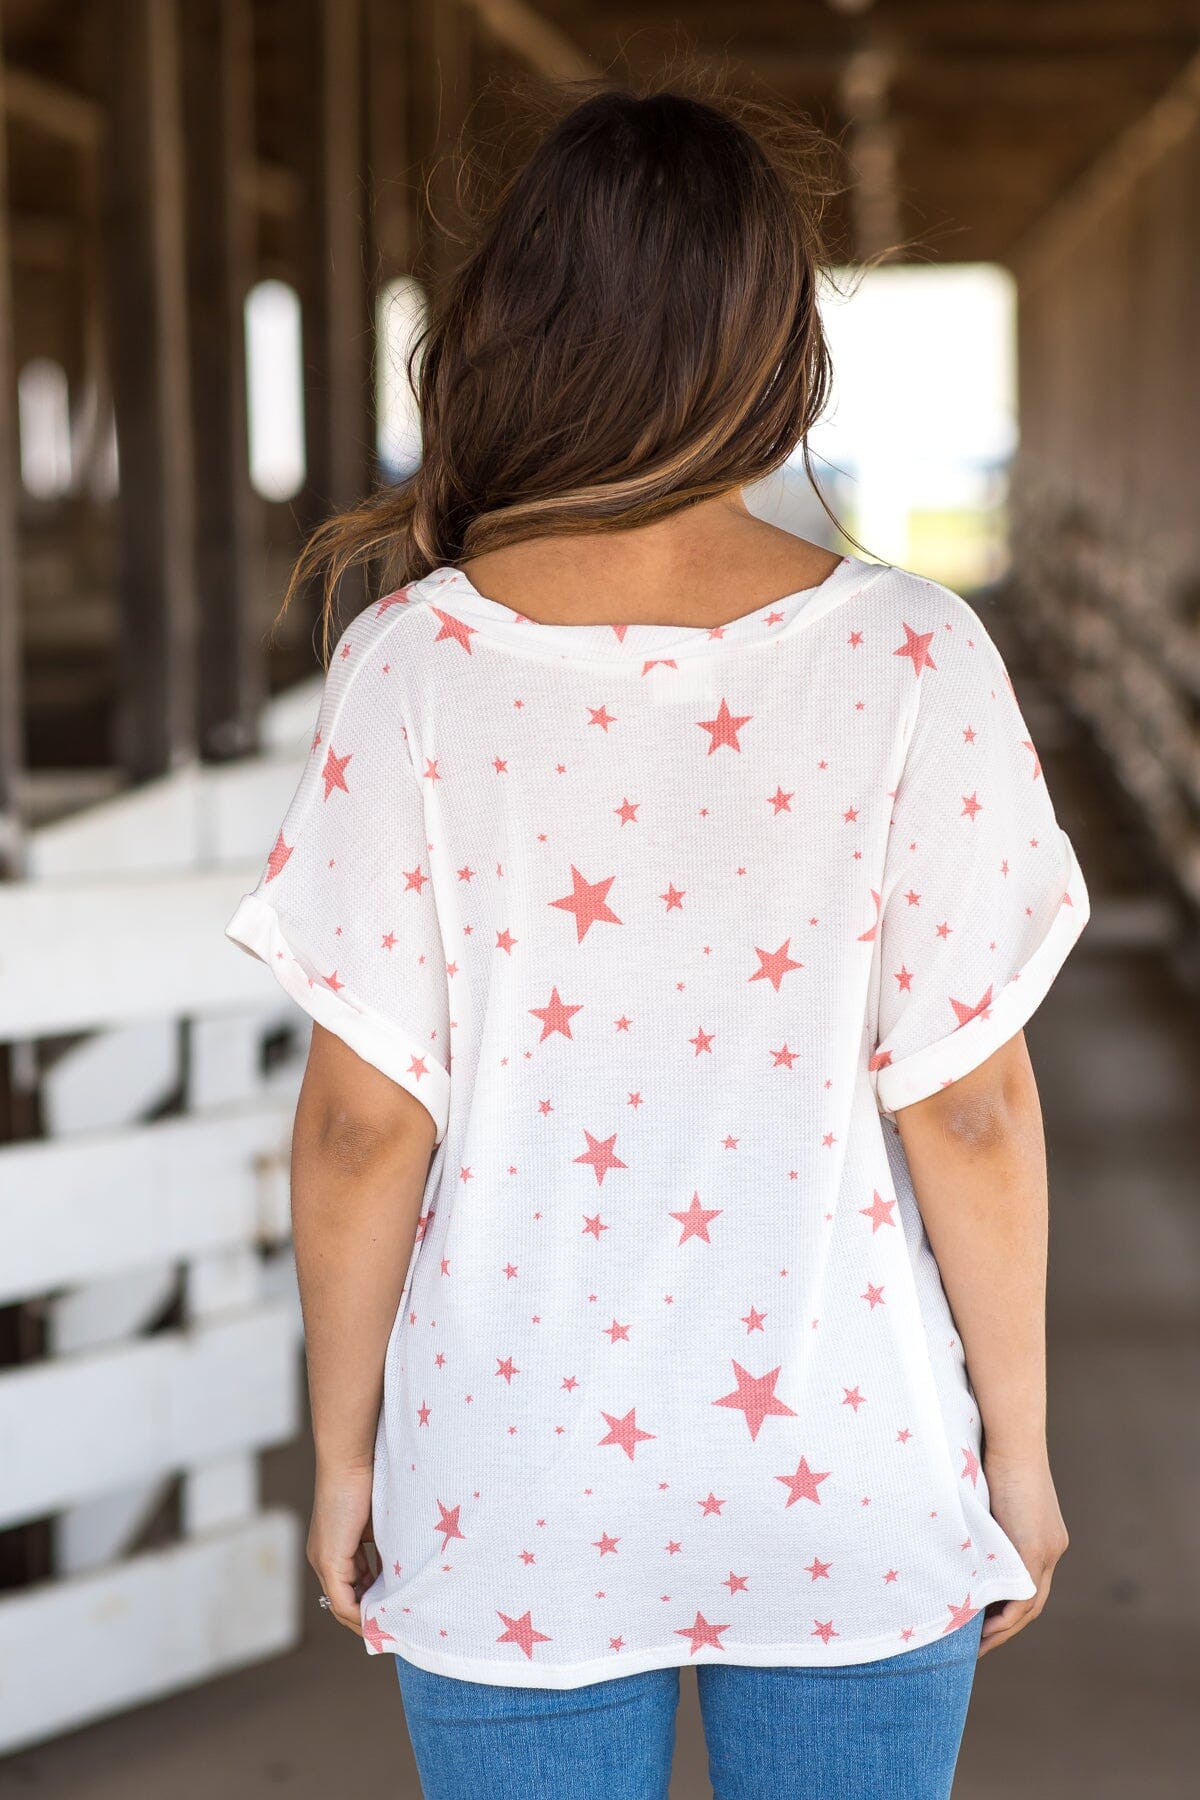 Off White and Blush Star Print Top - Filly Flair